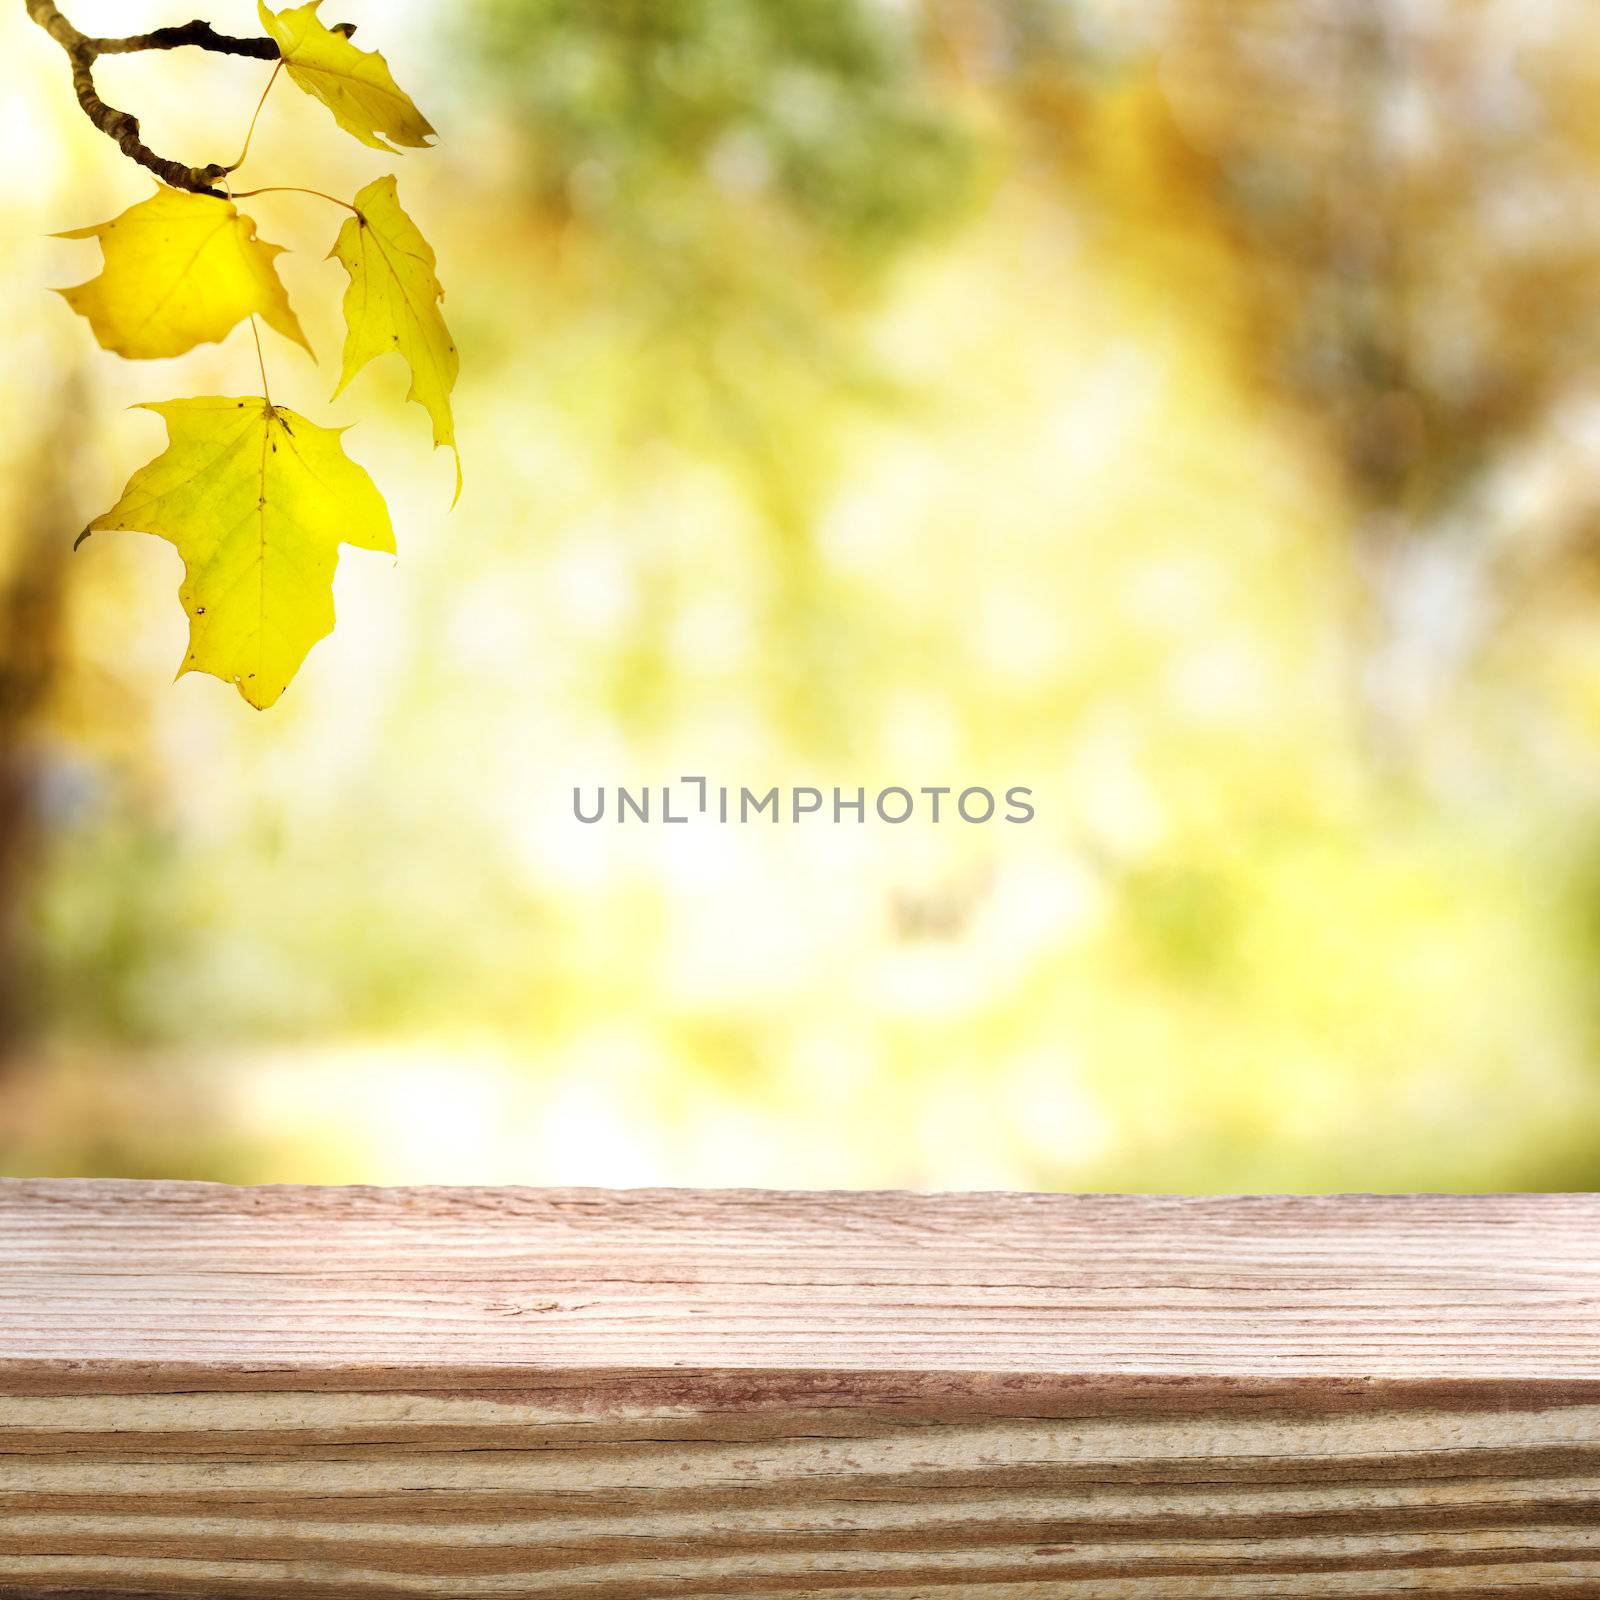 Aged and rustic wooden boards with an autumn sky and foliage background